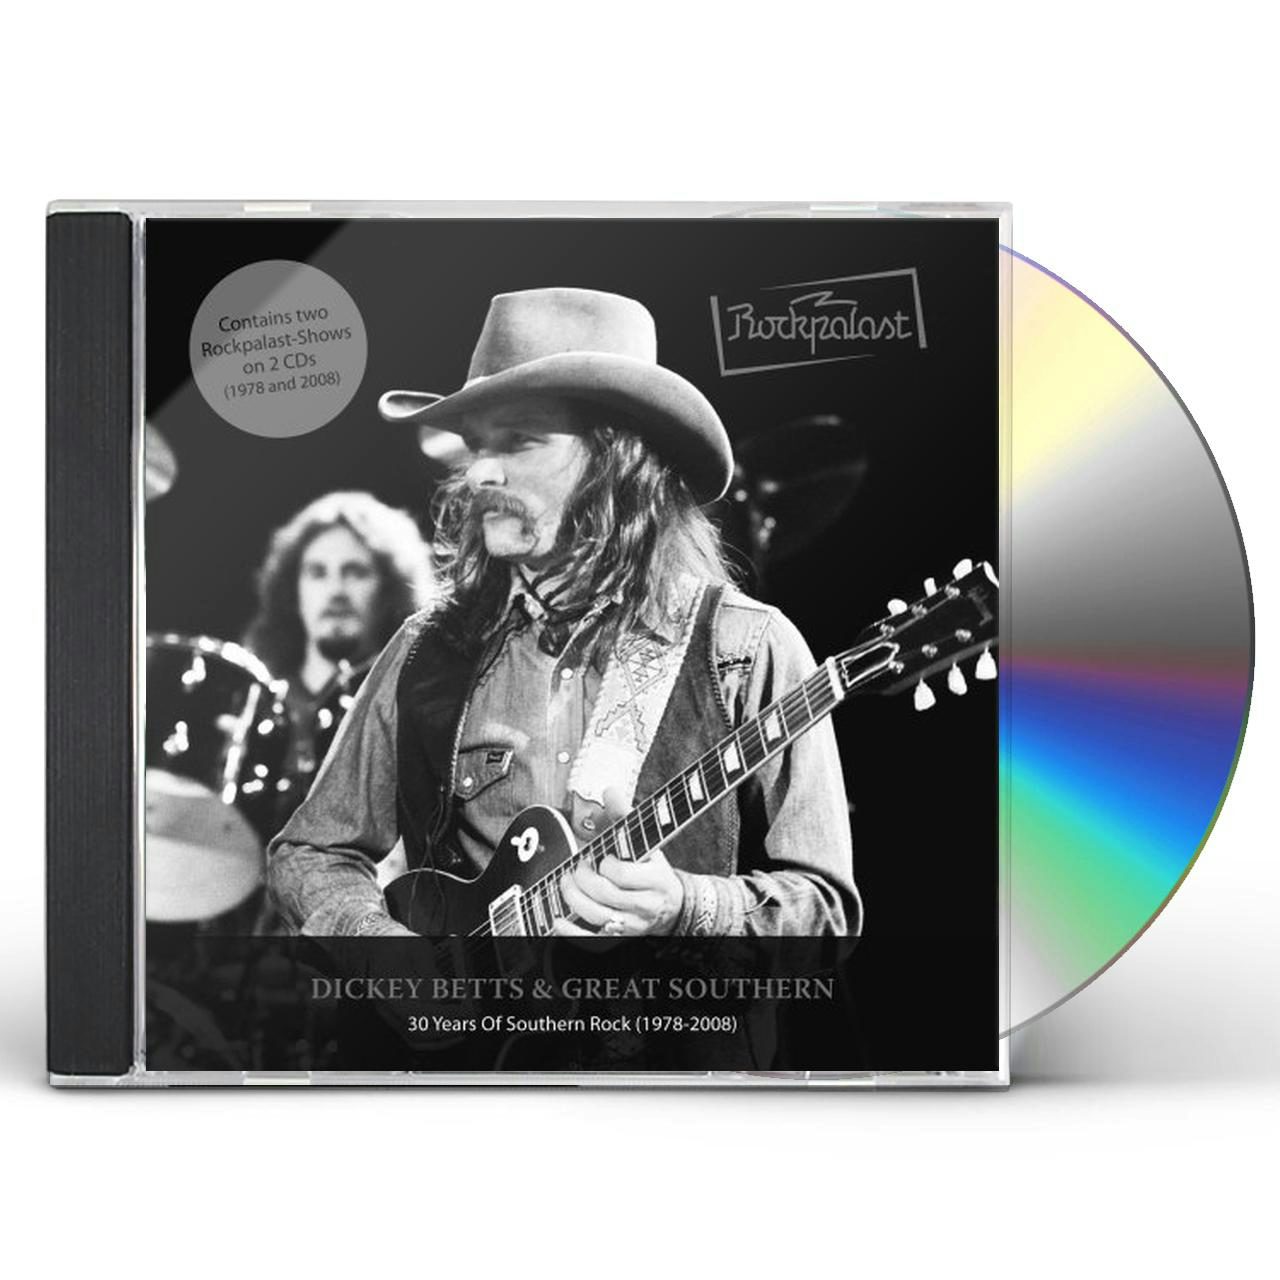 rockpalast: 30 years of southern rock cd - Dickey Betts